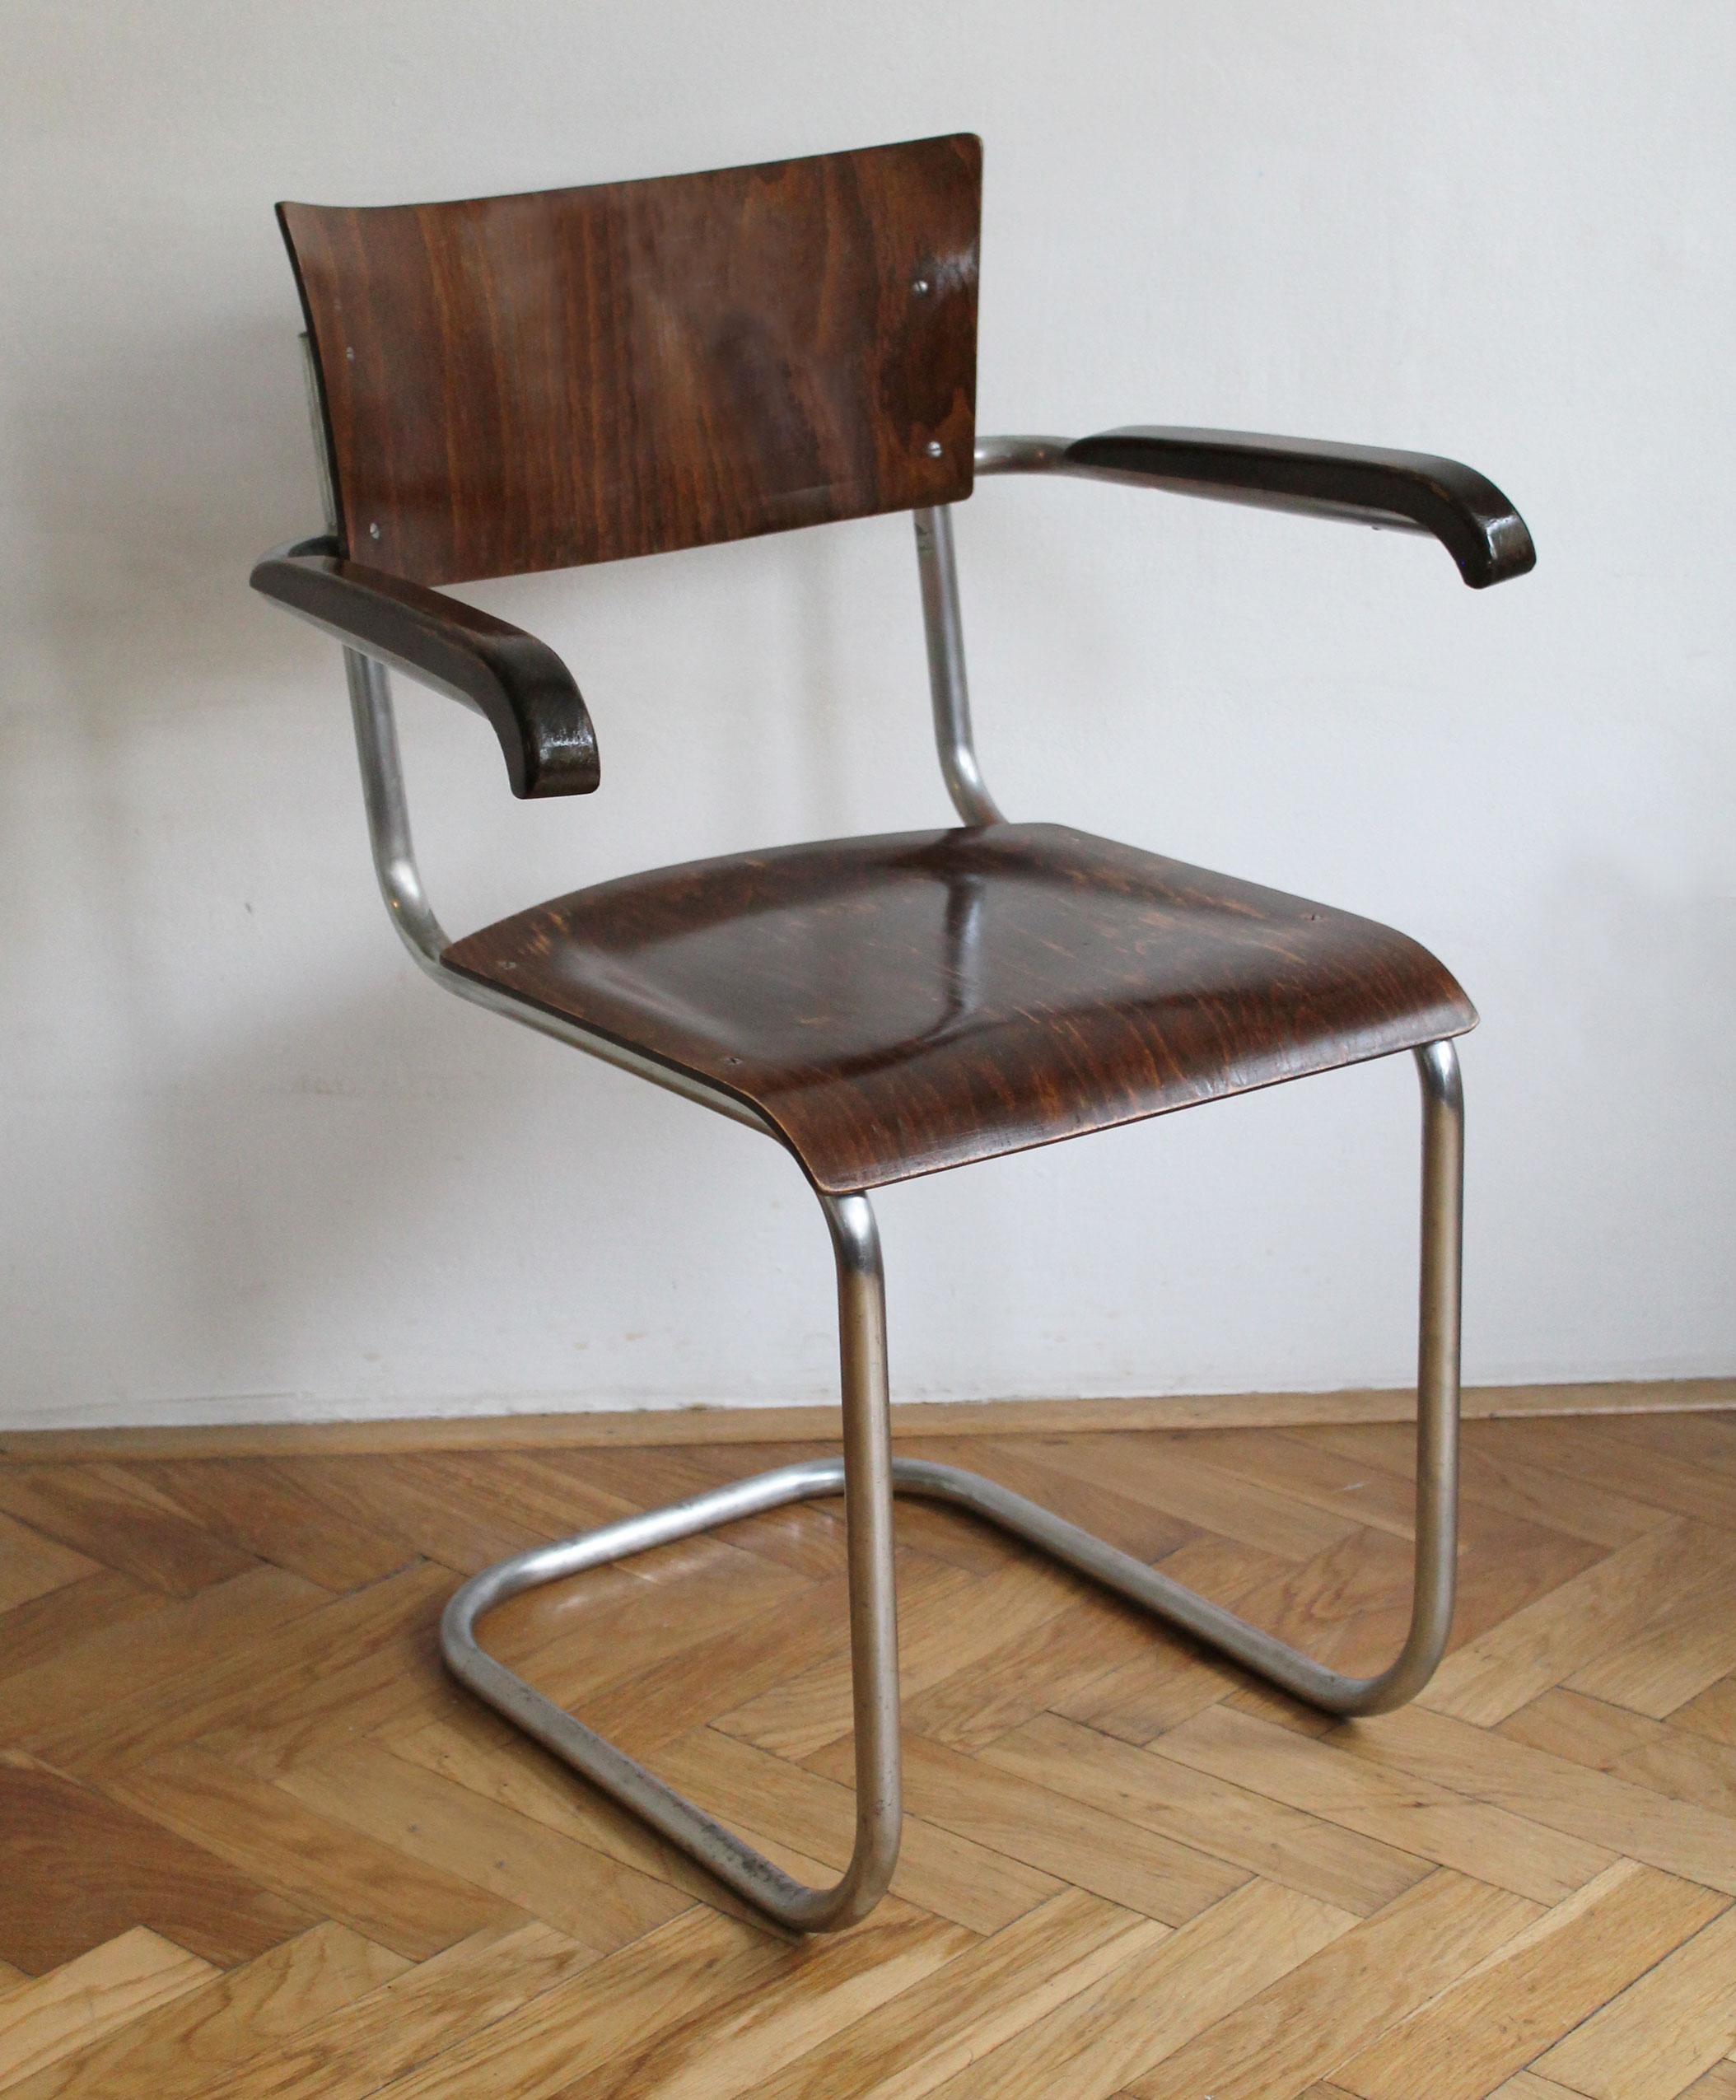 This piece is truly a great example of the radical Bauhaus aesthetic. Simple and functional, it perfectly represents the ethos of the avant-garde movement.

The radical design of a cantilevered chair (Freischwinger) was originally designed by the